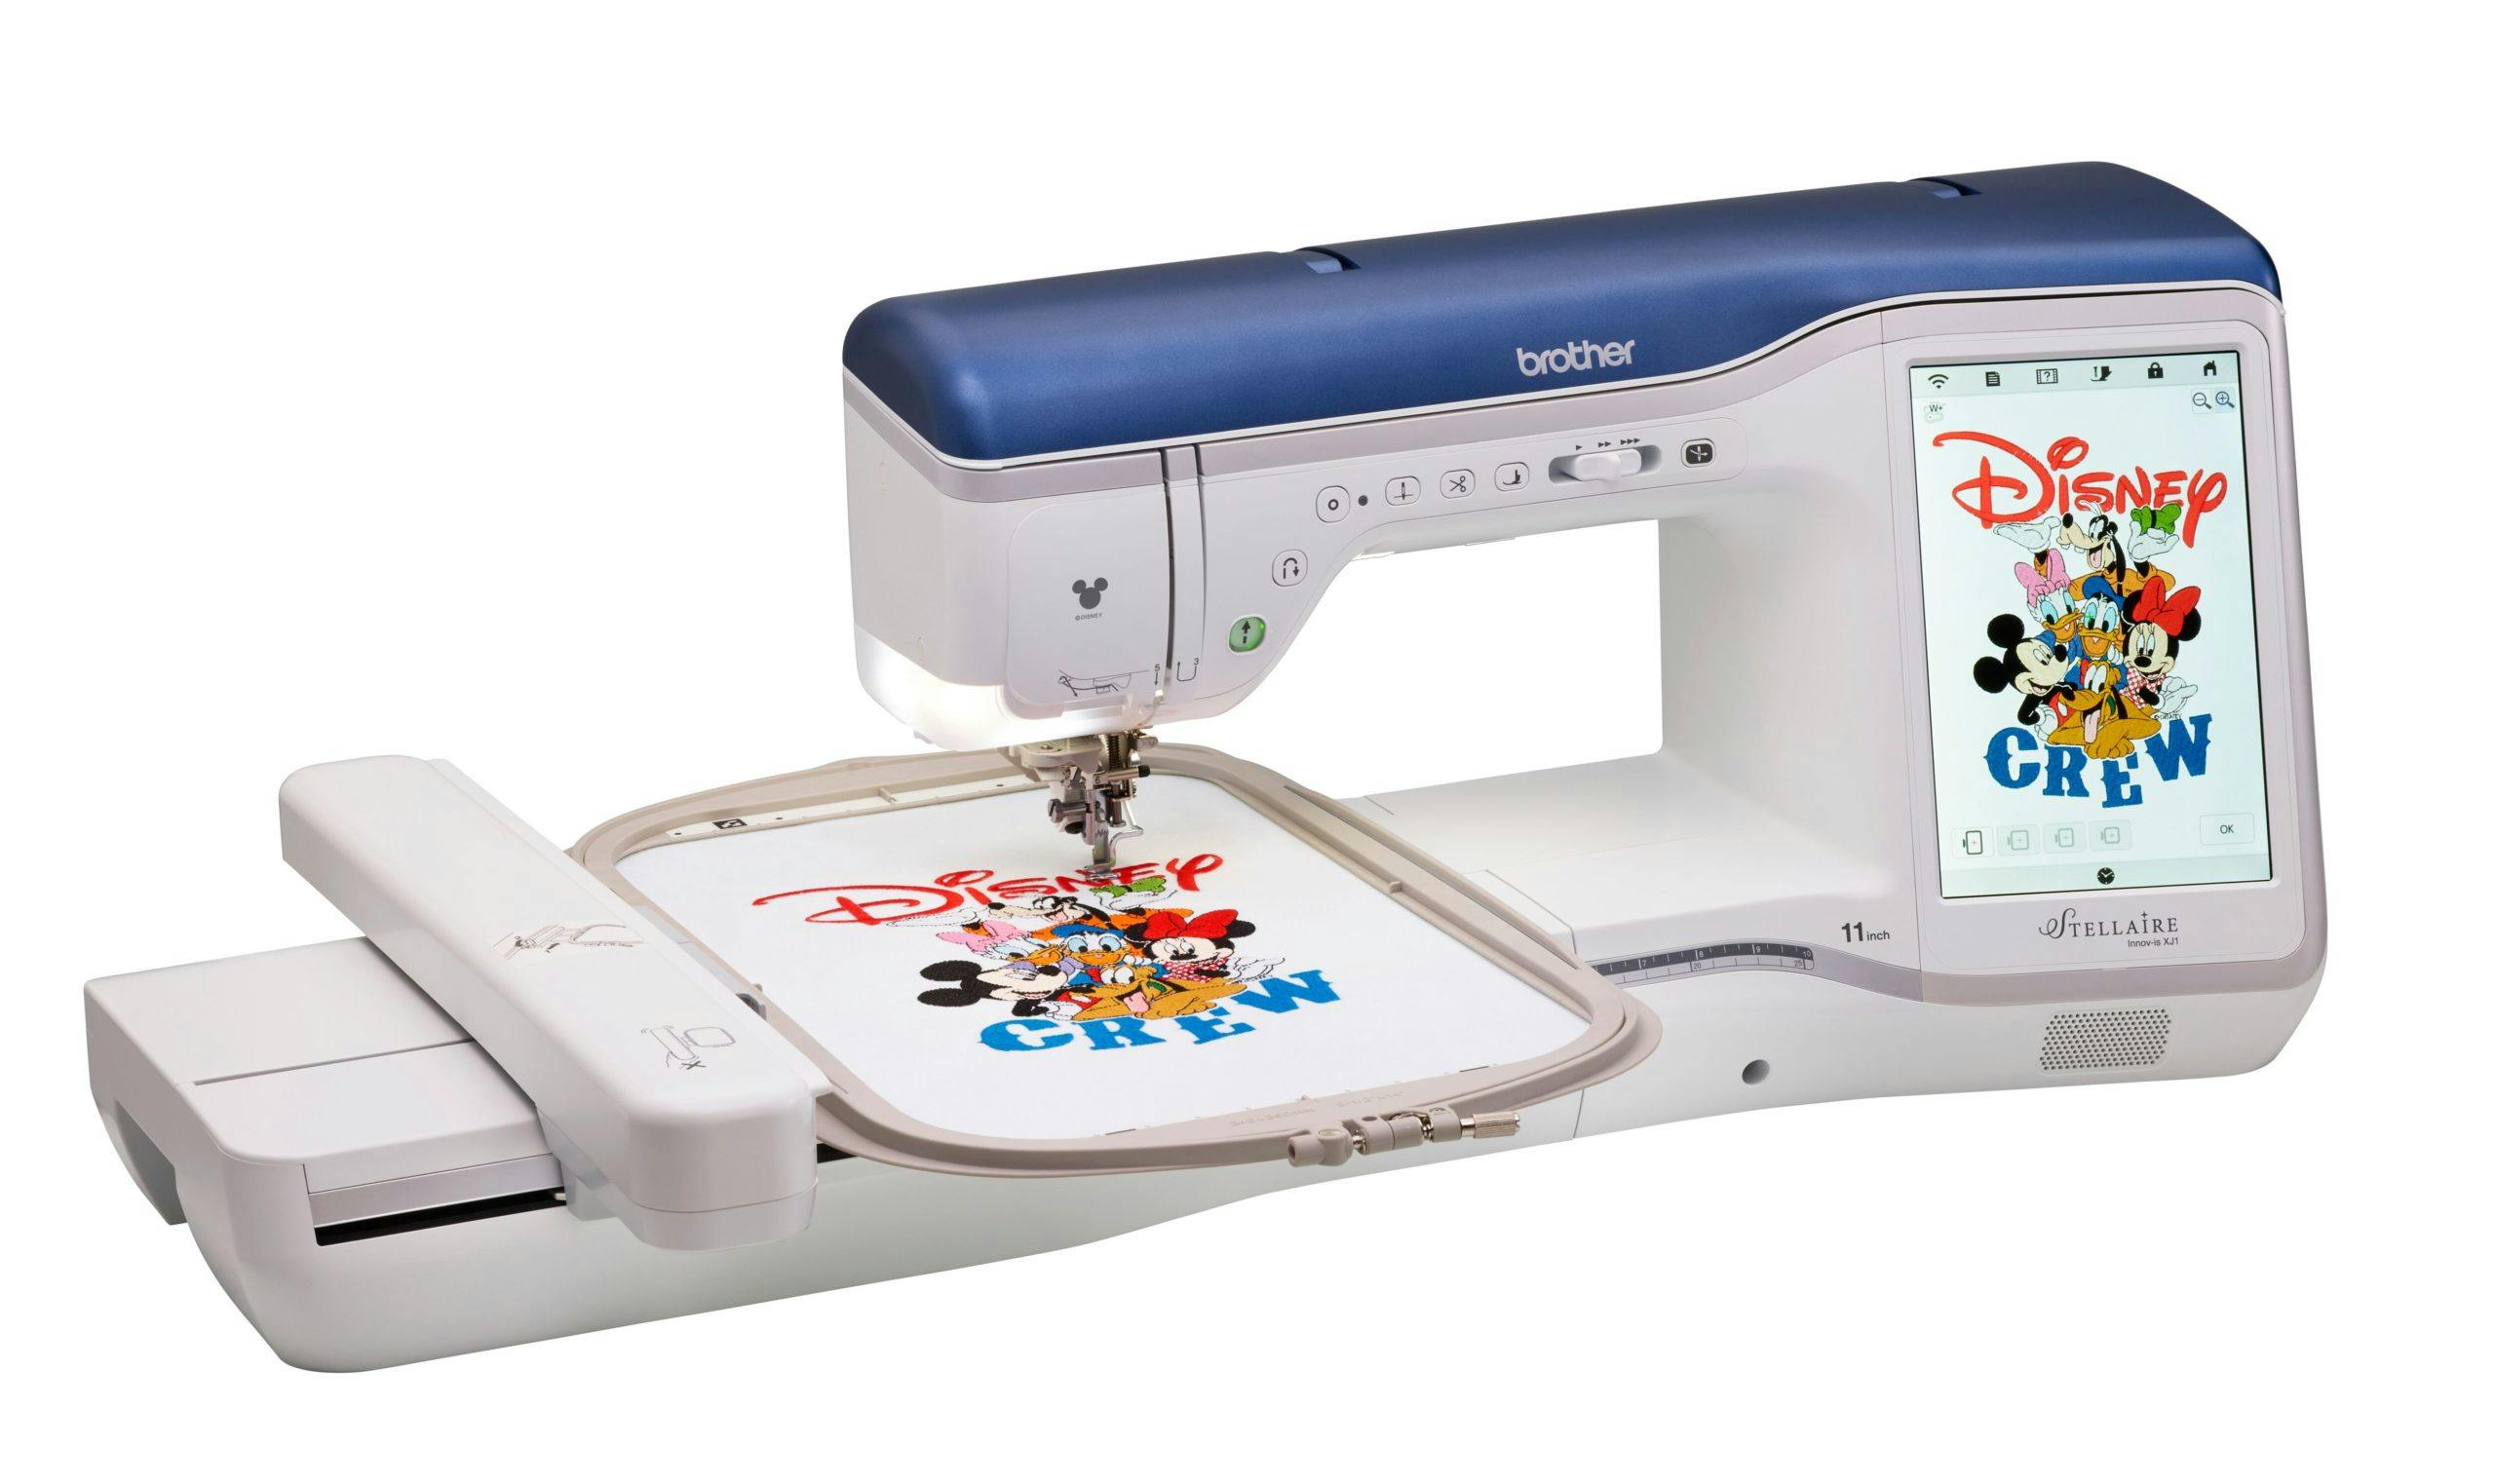 Photo of the Brother Stellaire XJ1 sewing and embroidery only machine with Disney design